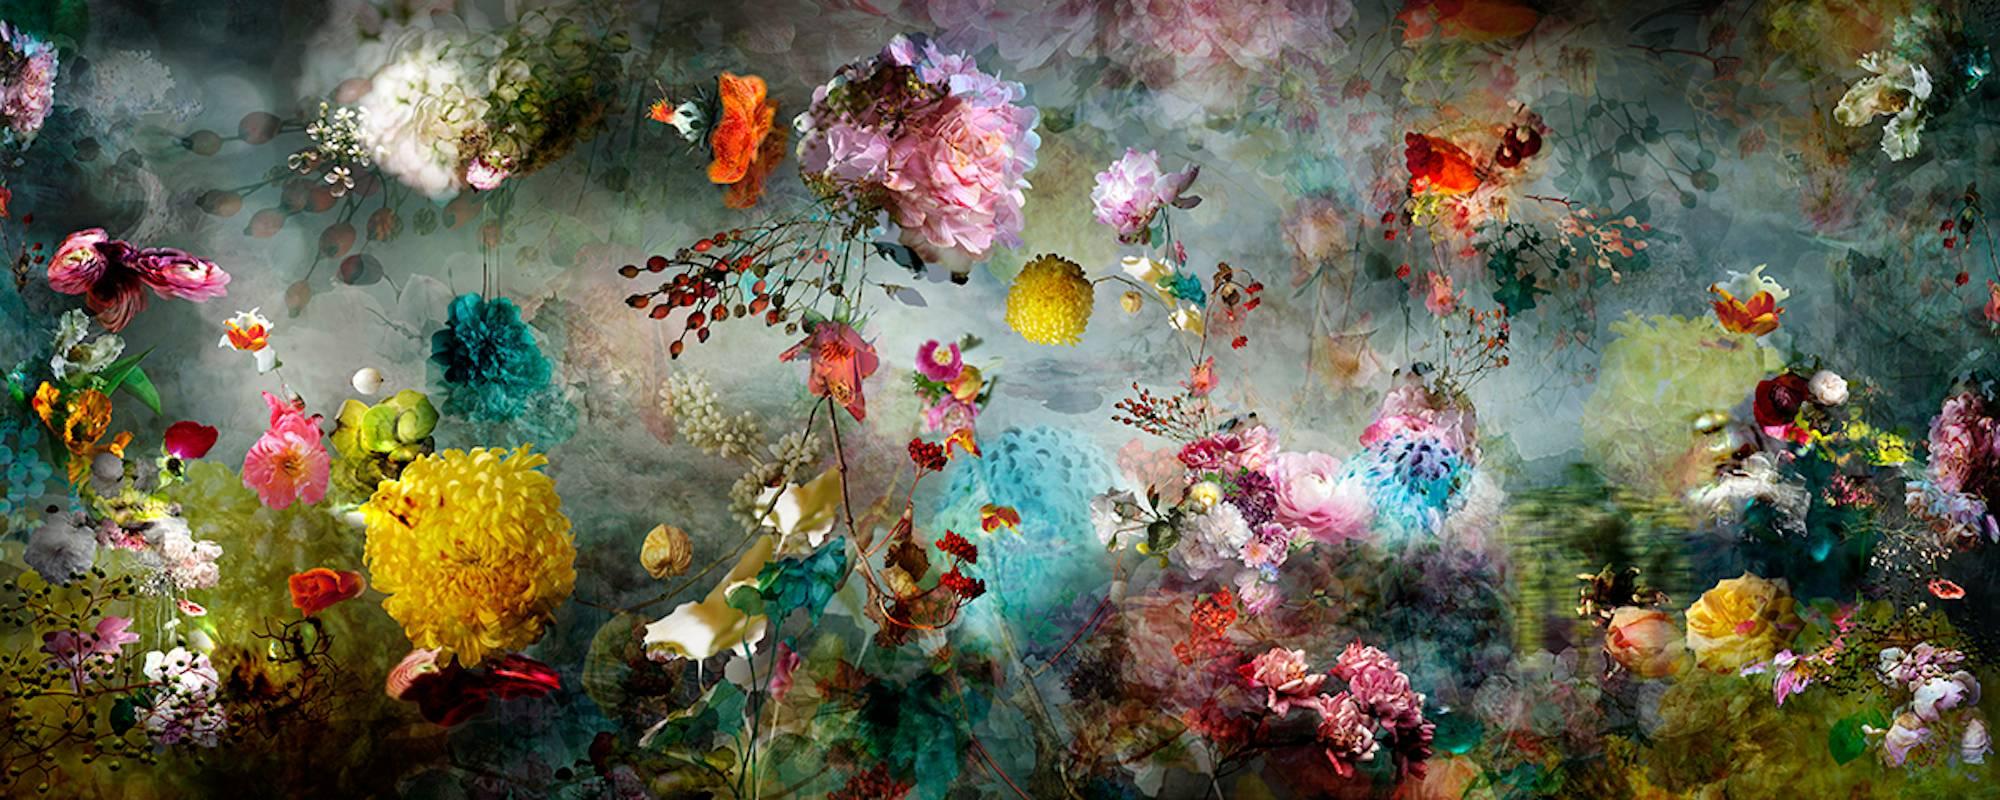 Isabelle Menin Color Photograph - Song for Dead Heroes #12 colorful abstract floral landscape still life photo